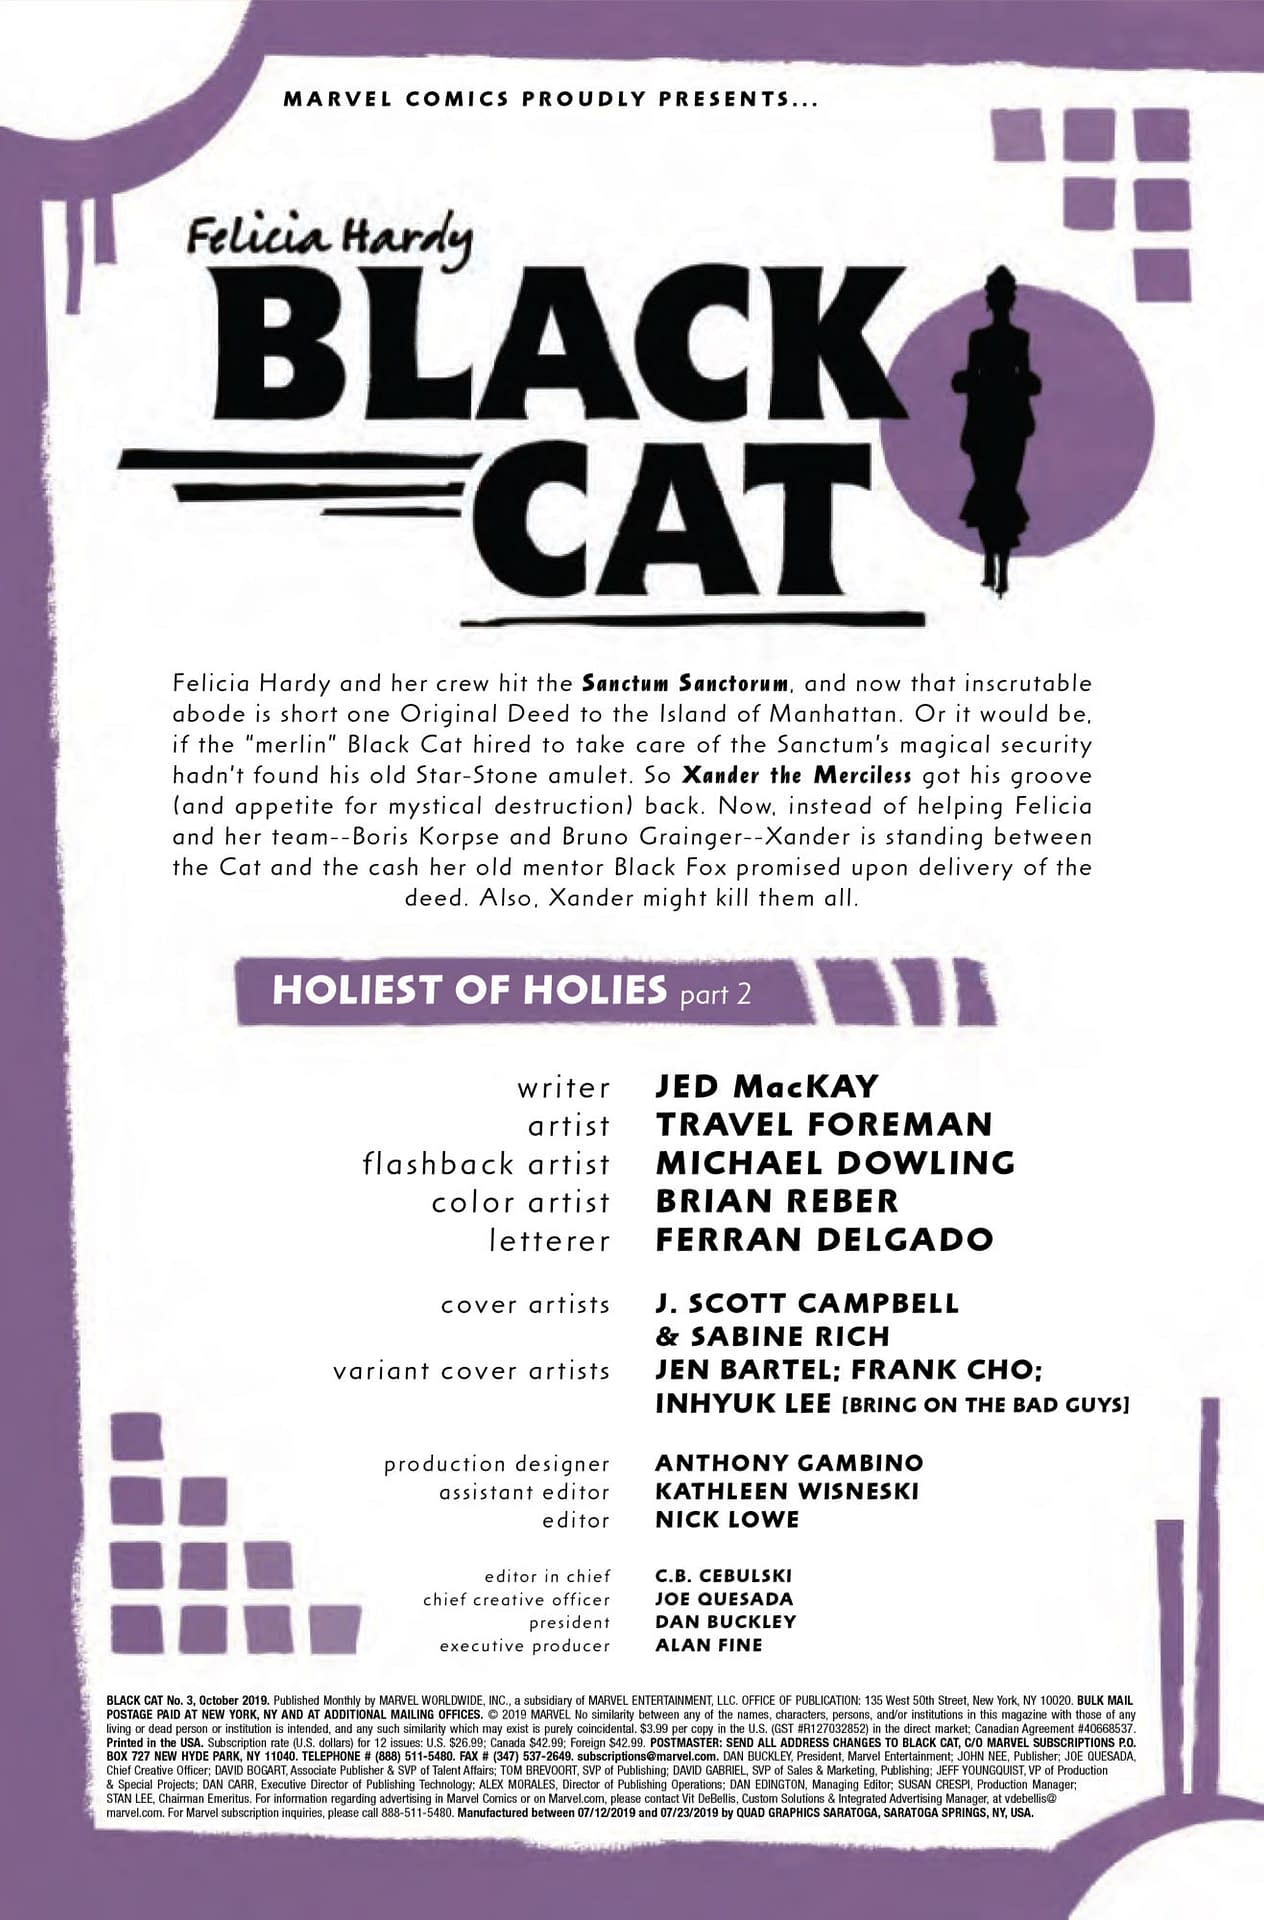 A Case of Mistaken Identity in Black Cat #3 [Preview]